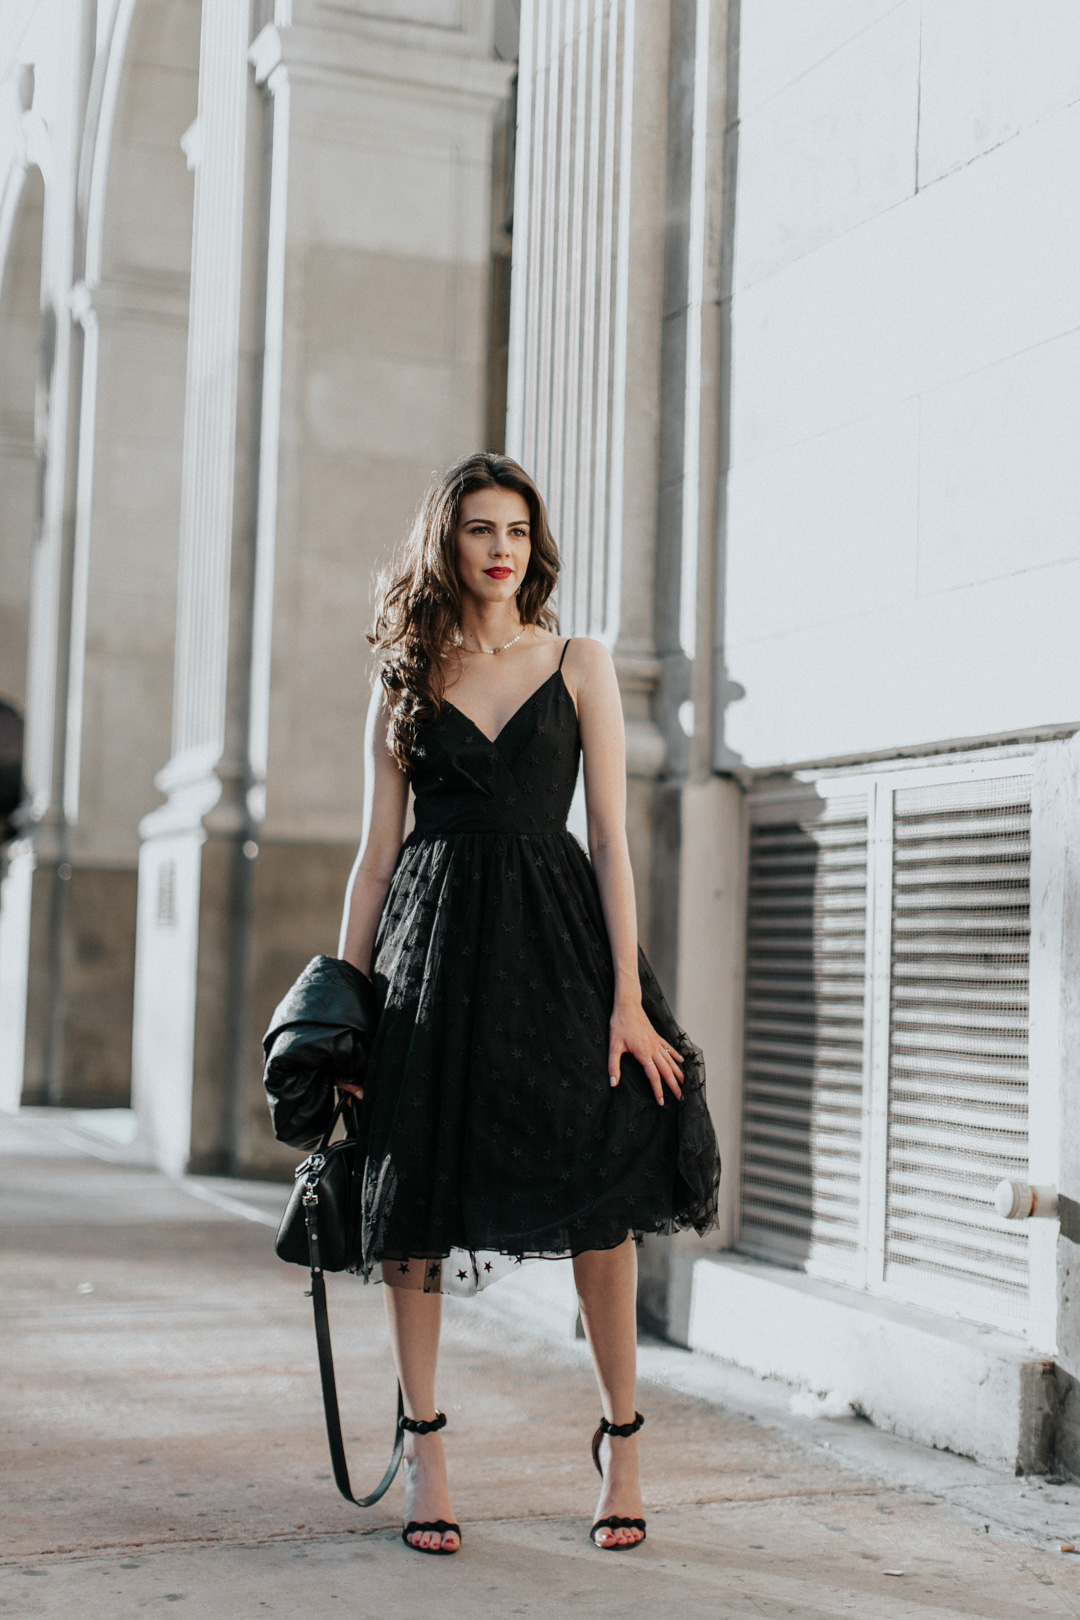 Jackie Roque styling a date night outfit from J.Crew star tulle dress in Miami.